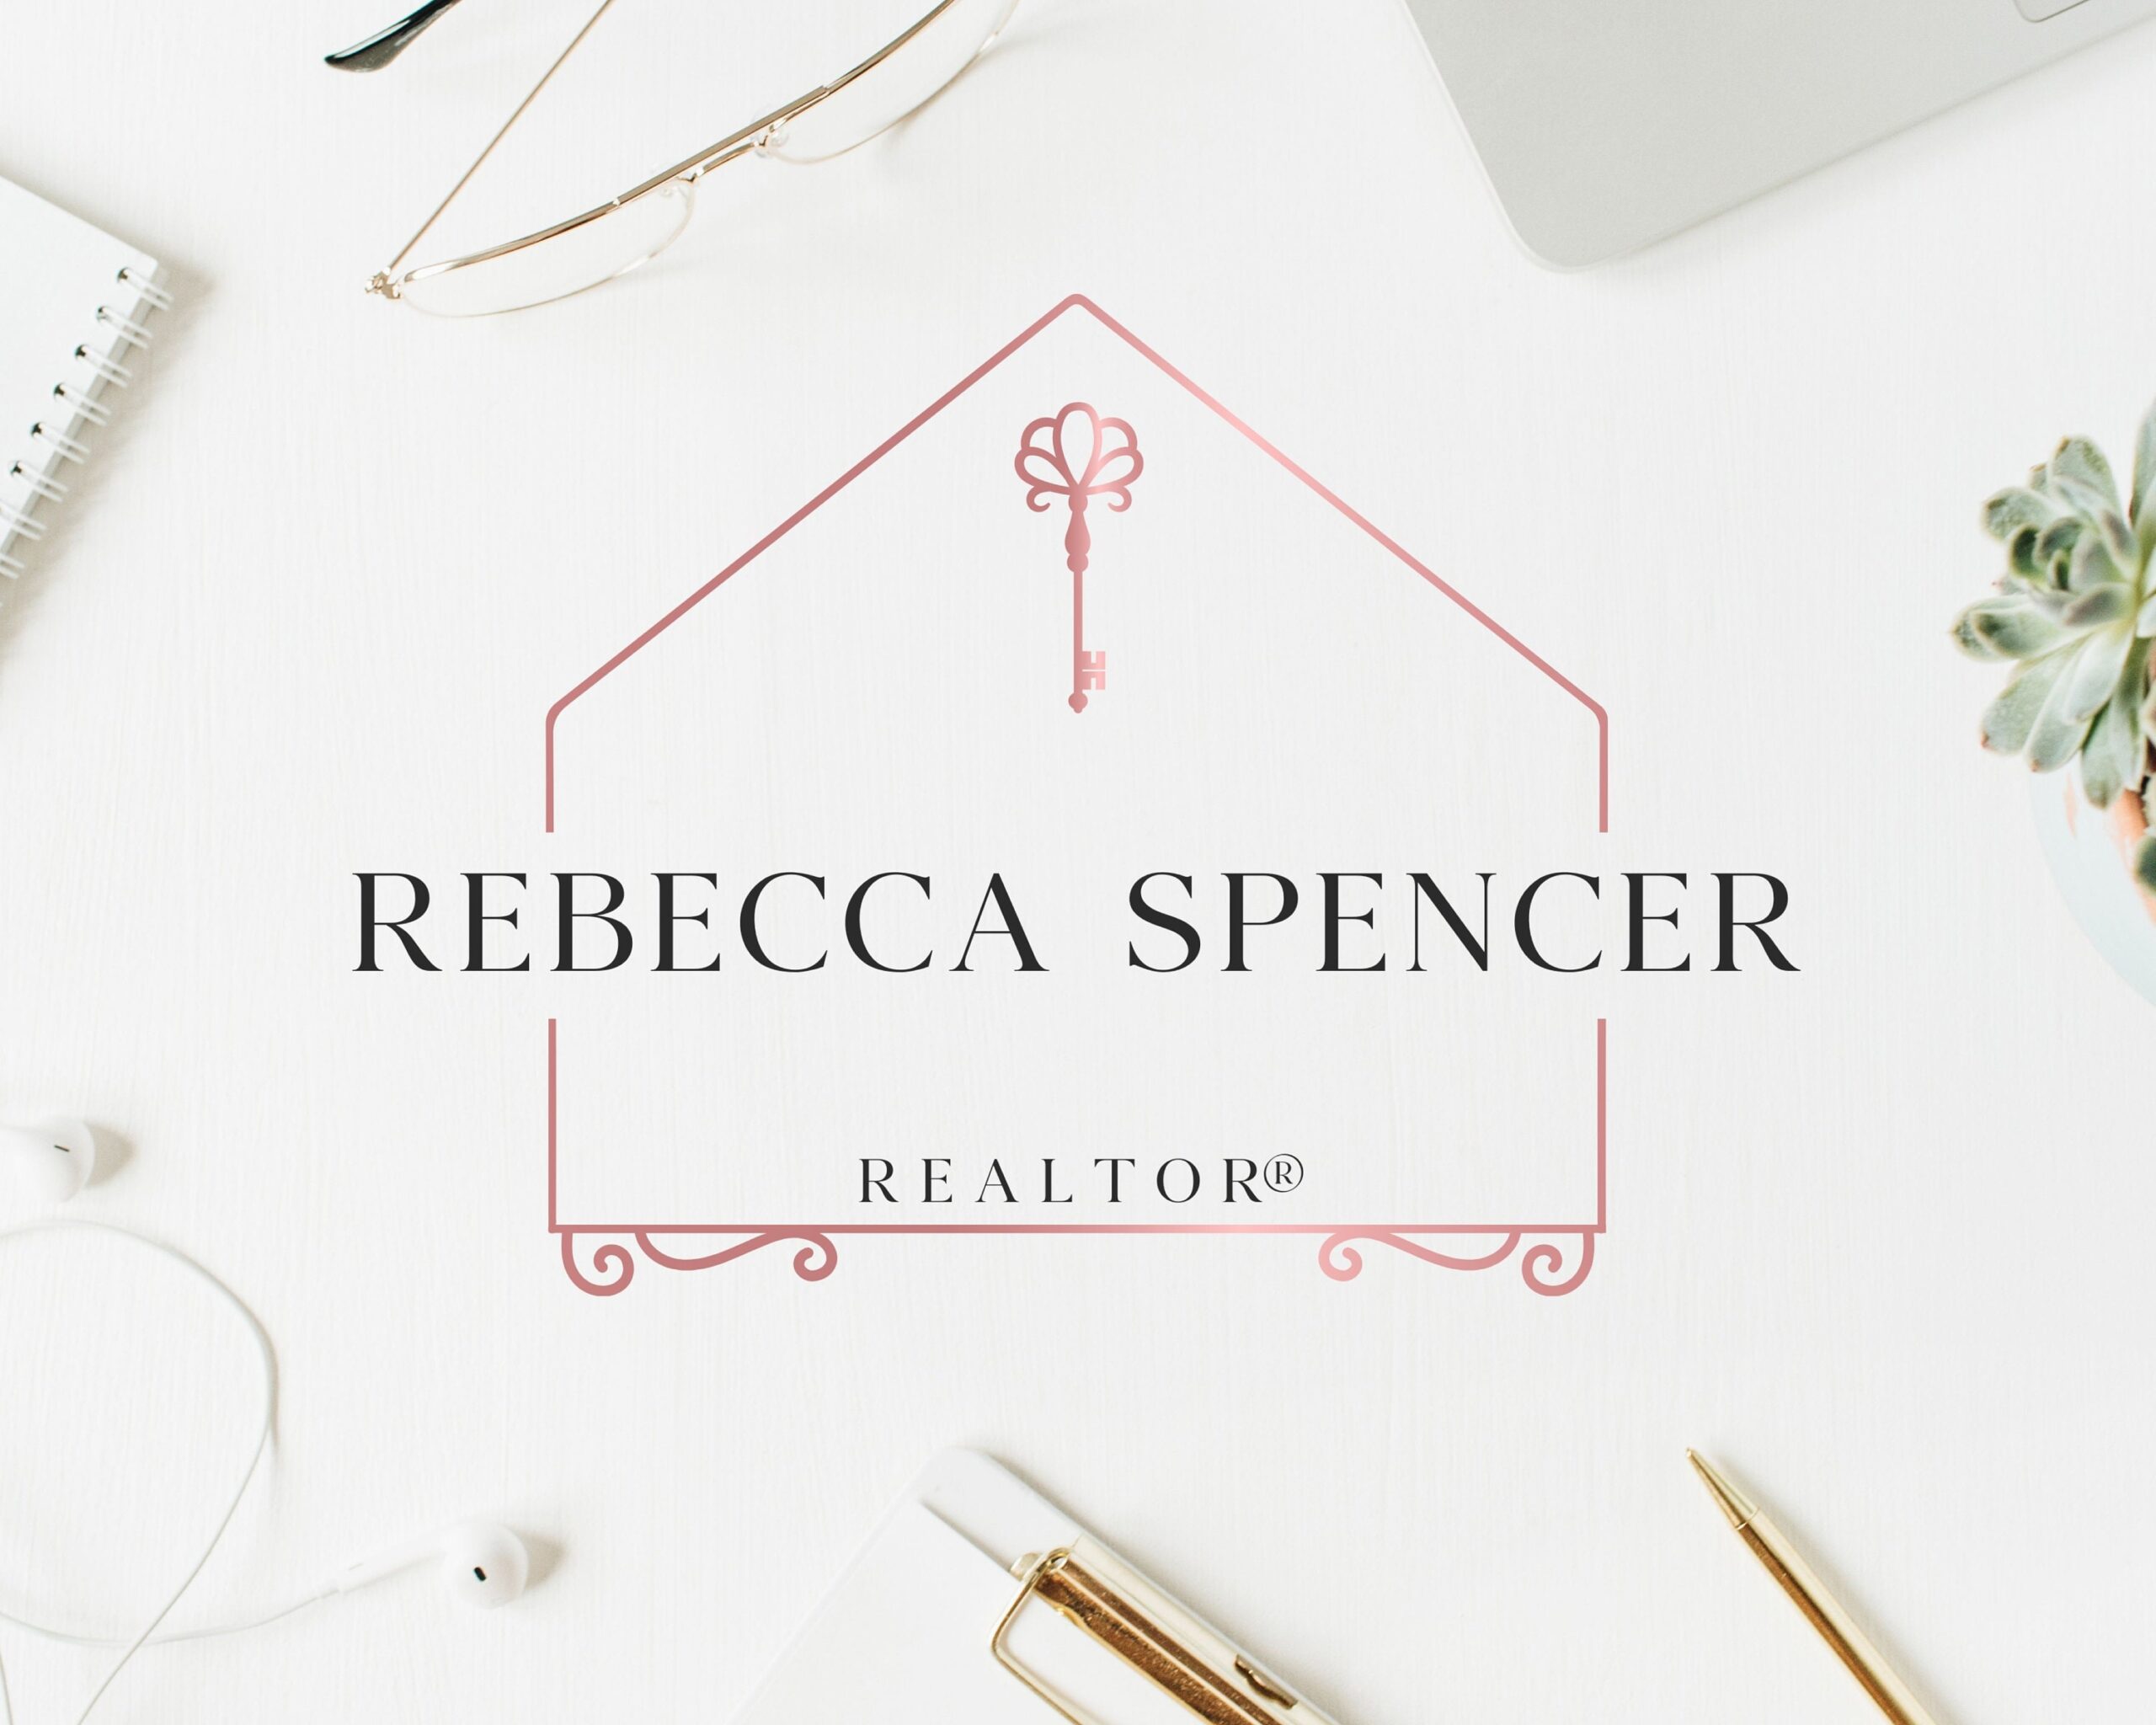 PREMADE LOGO for Real Estate Agents - Minimalist Rose Gold Logo Pack - ALL Designs Included - High-Quality Branding for Real Estate Agents